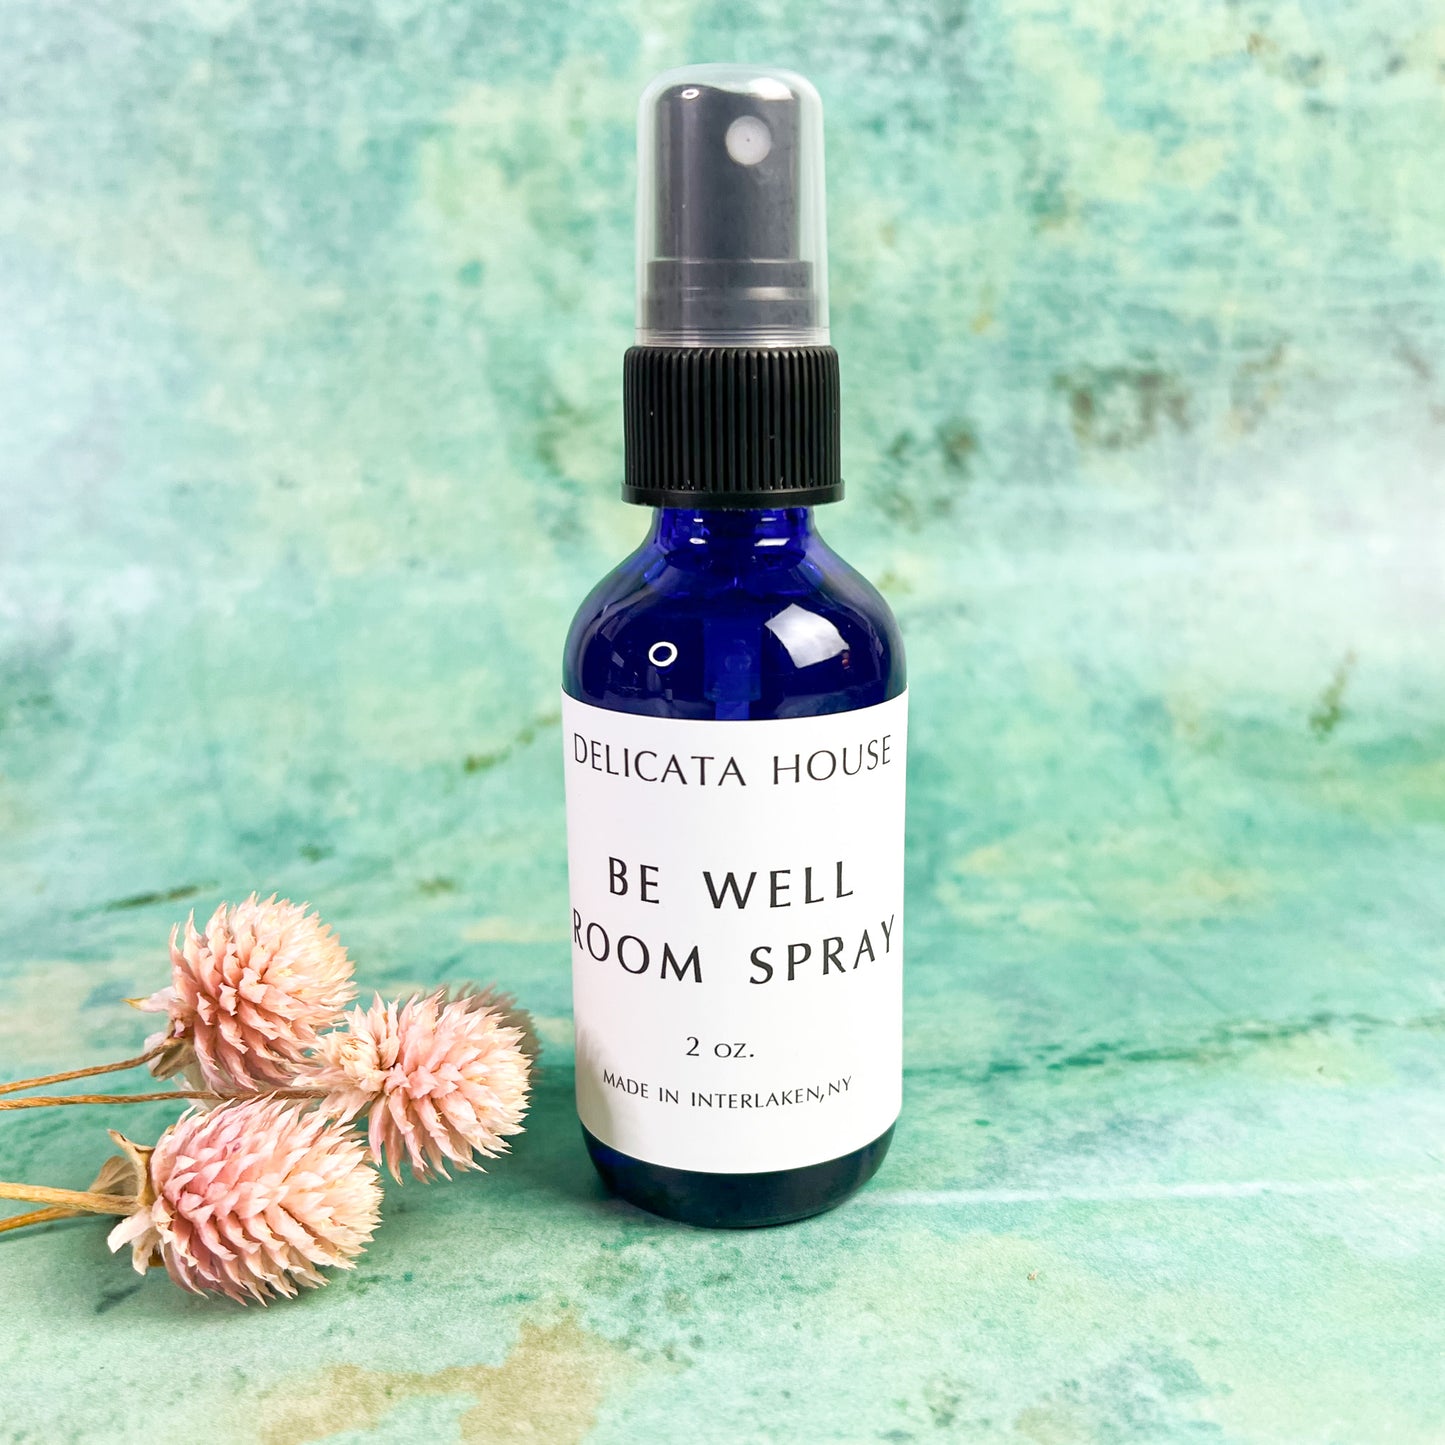 Be Well Room Spray - Clean and Clear Room Spray - Bright and Uplifting Room Spray with Grapefruit, Basil, and Tea Tree essential oils